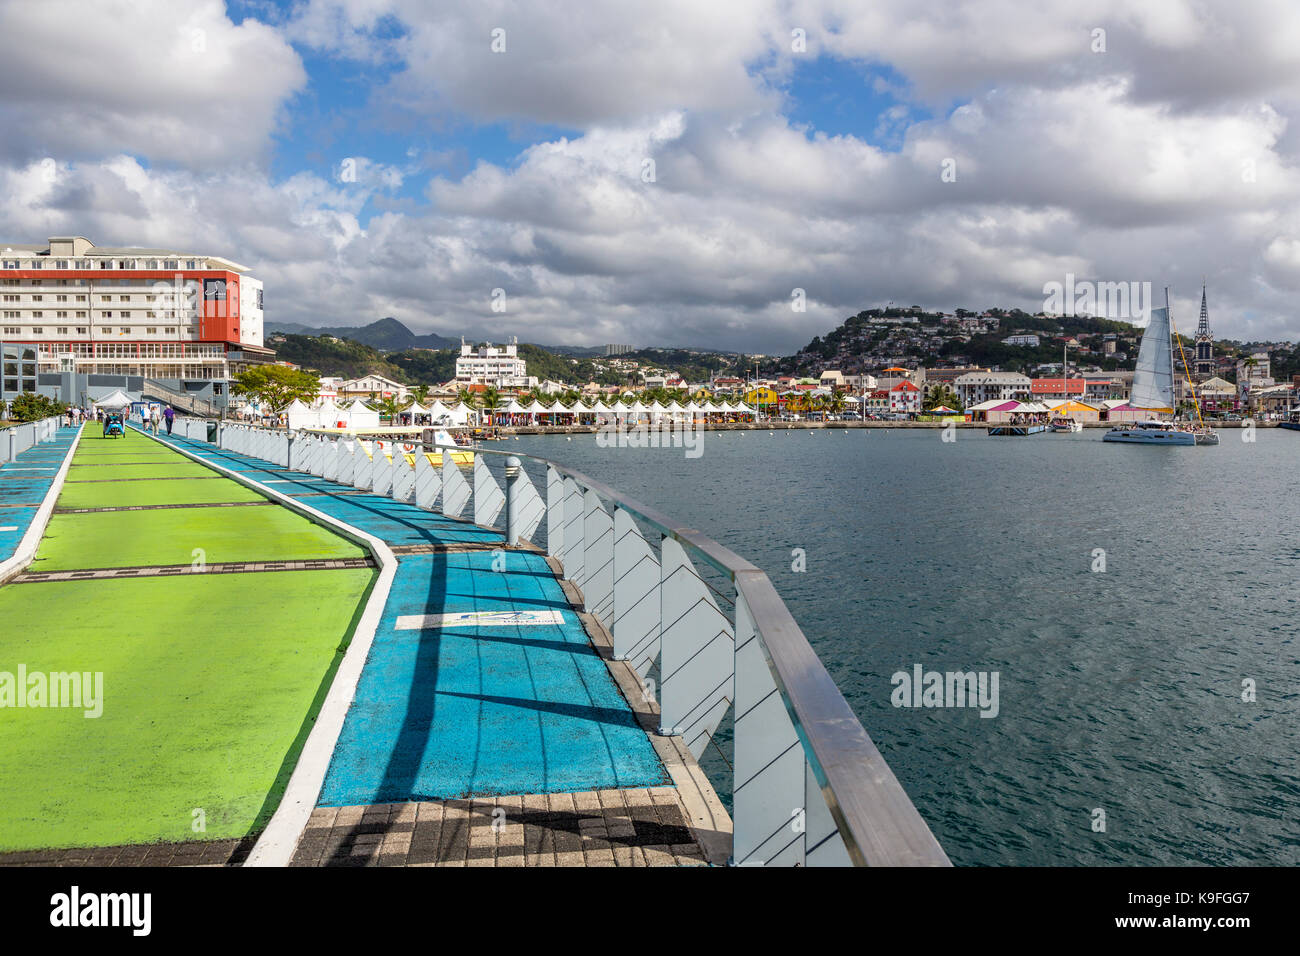 Fort-de-France, Martinique.  View of the Town from the Cruise Ship Pier, Early Morning. Stock Photo